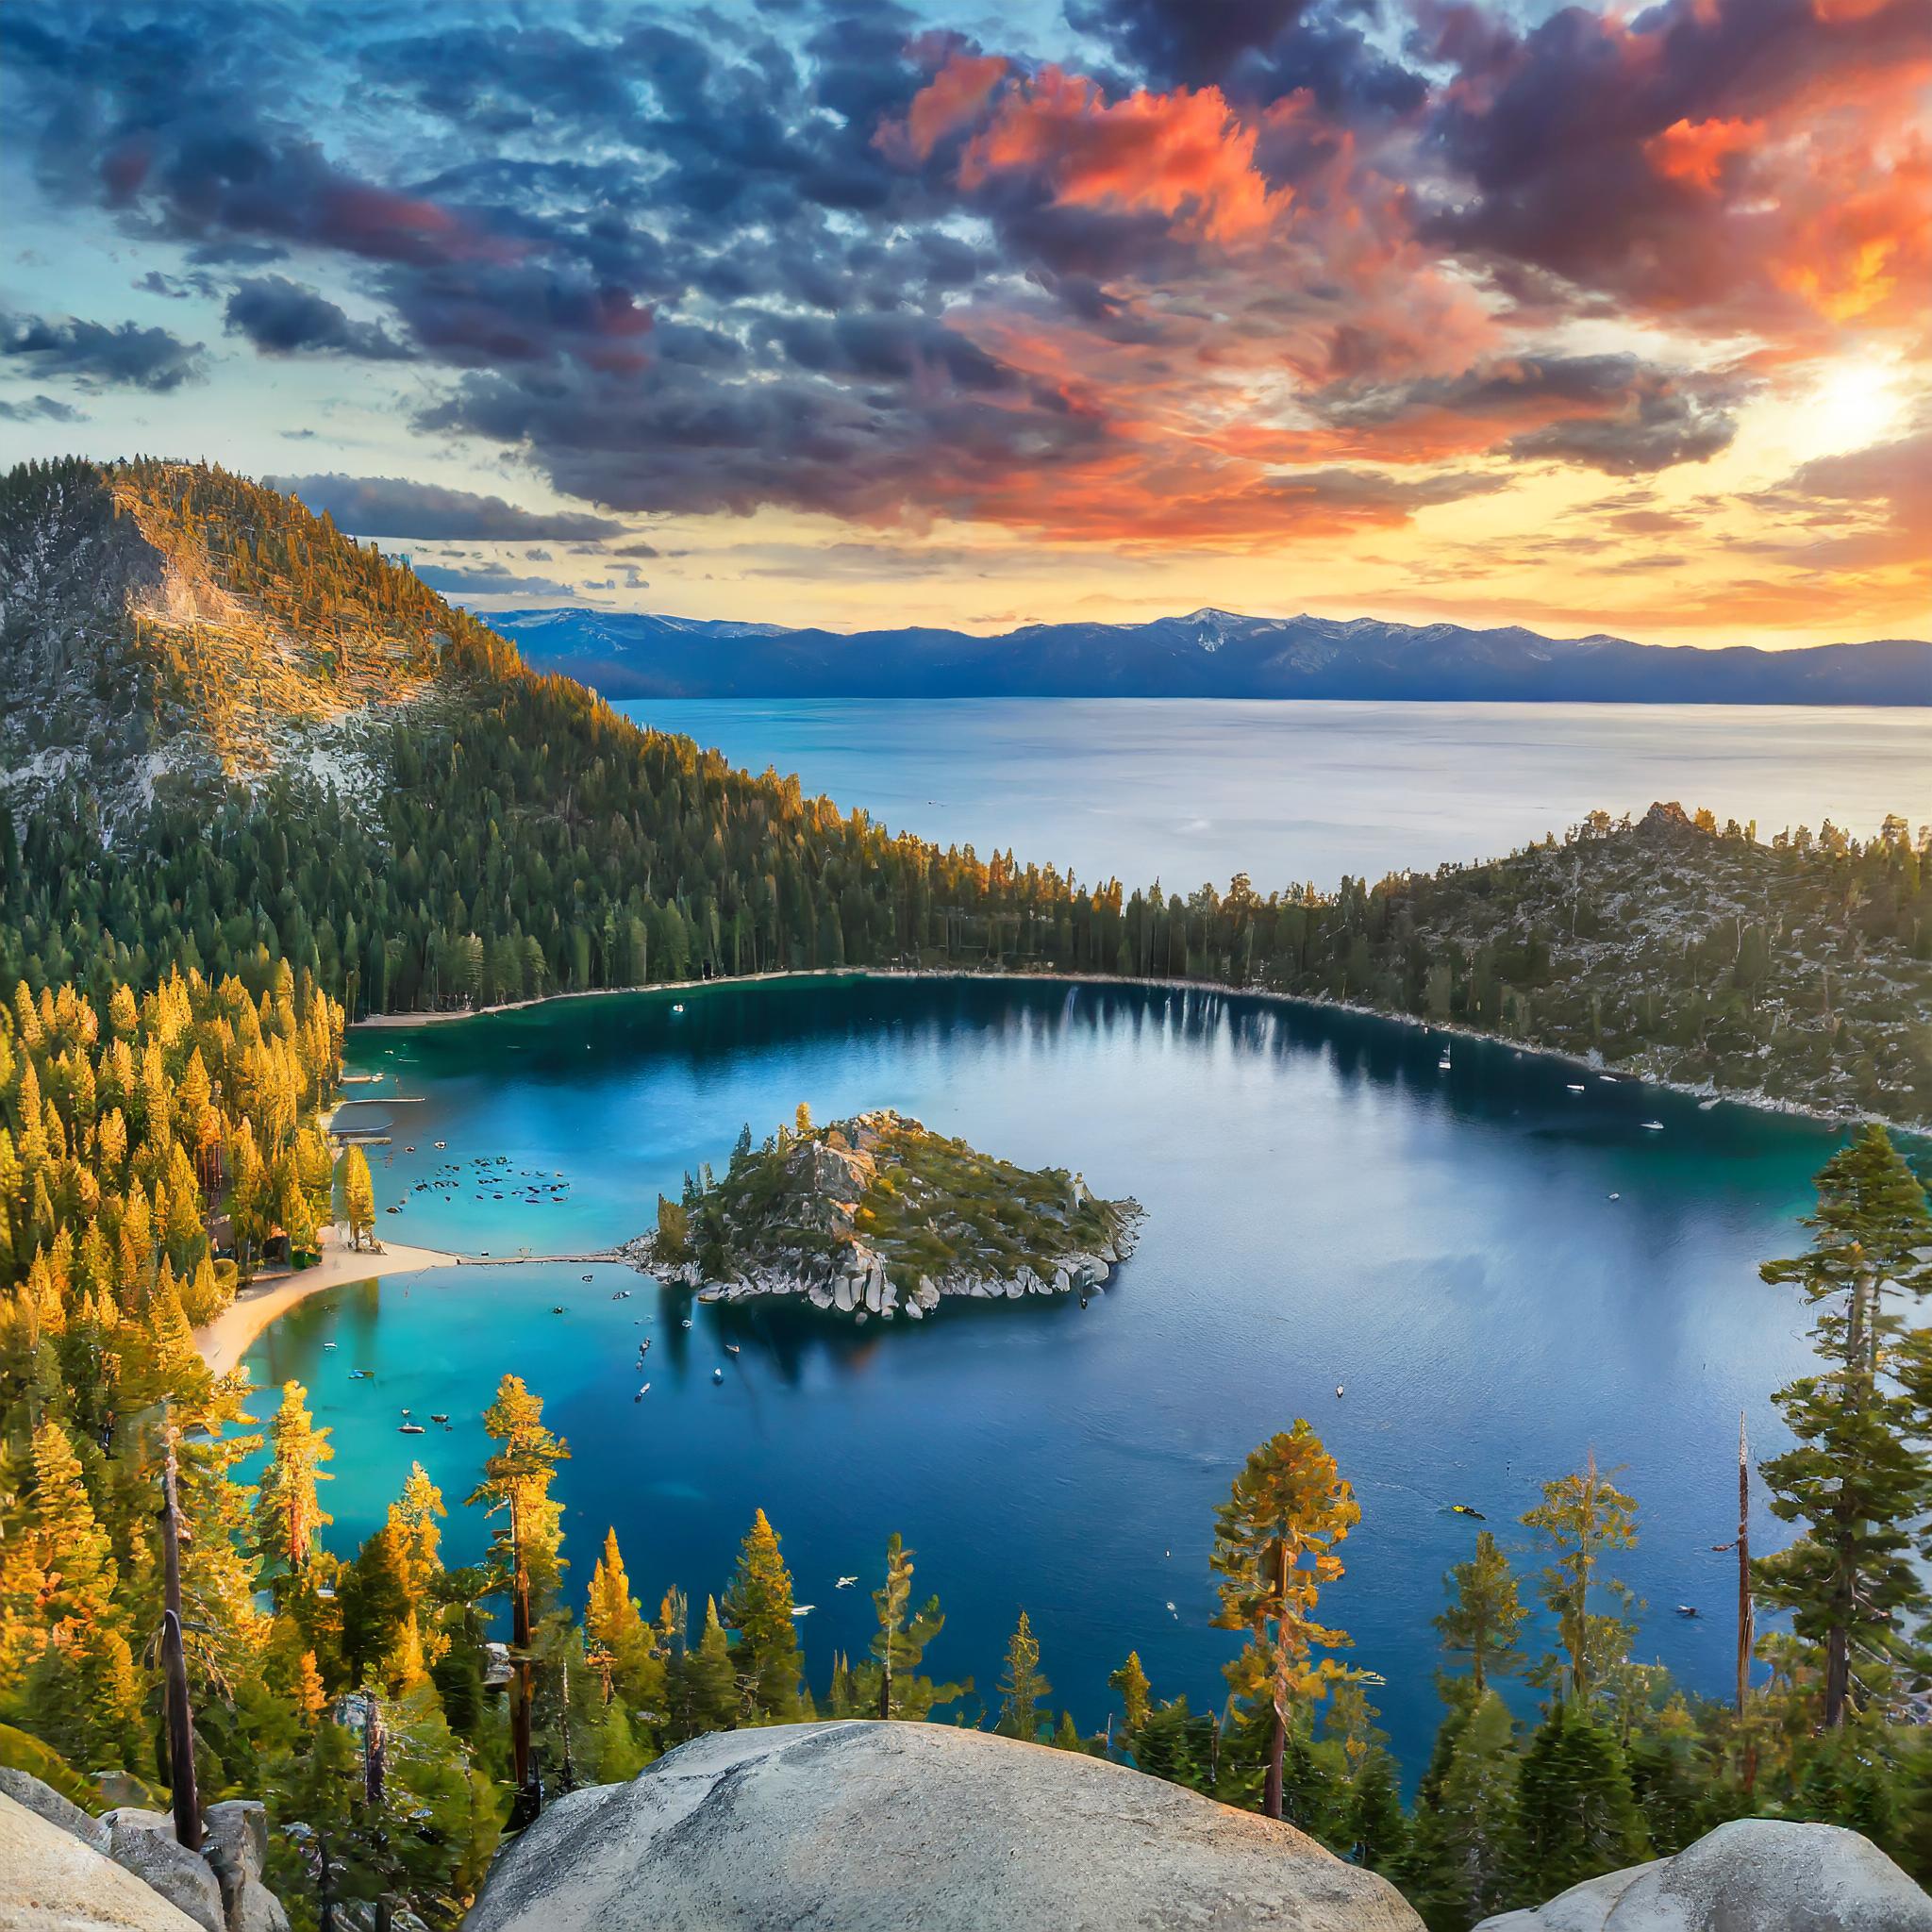 Sunset view of Emerald Bay in Lake Tahoe